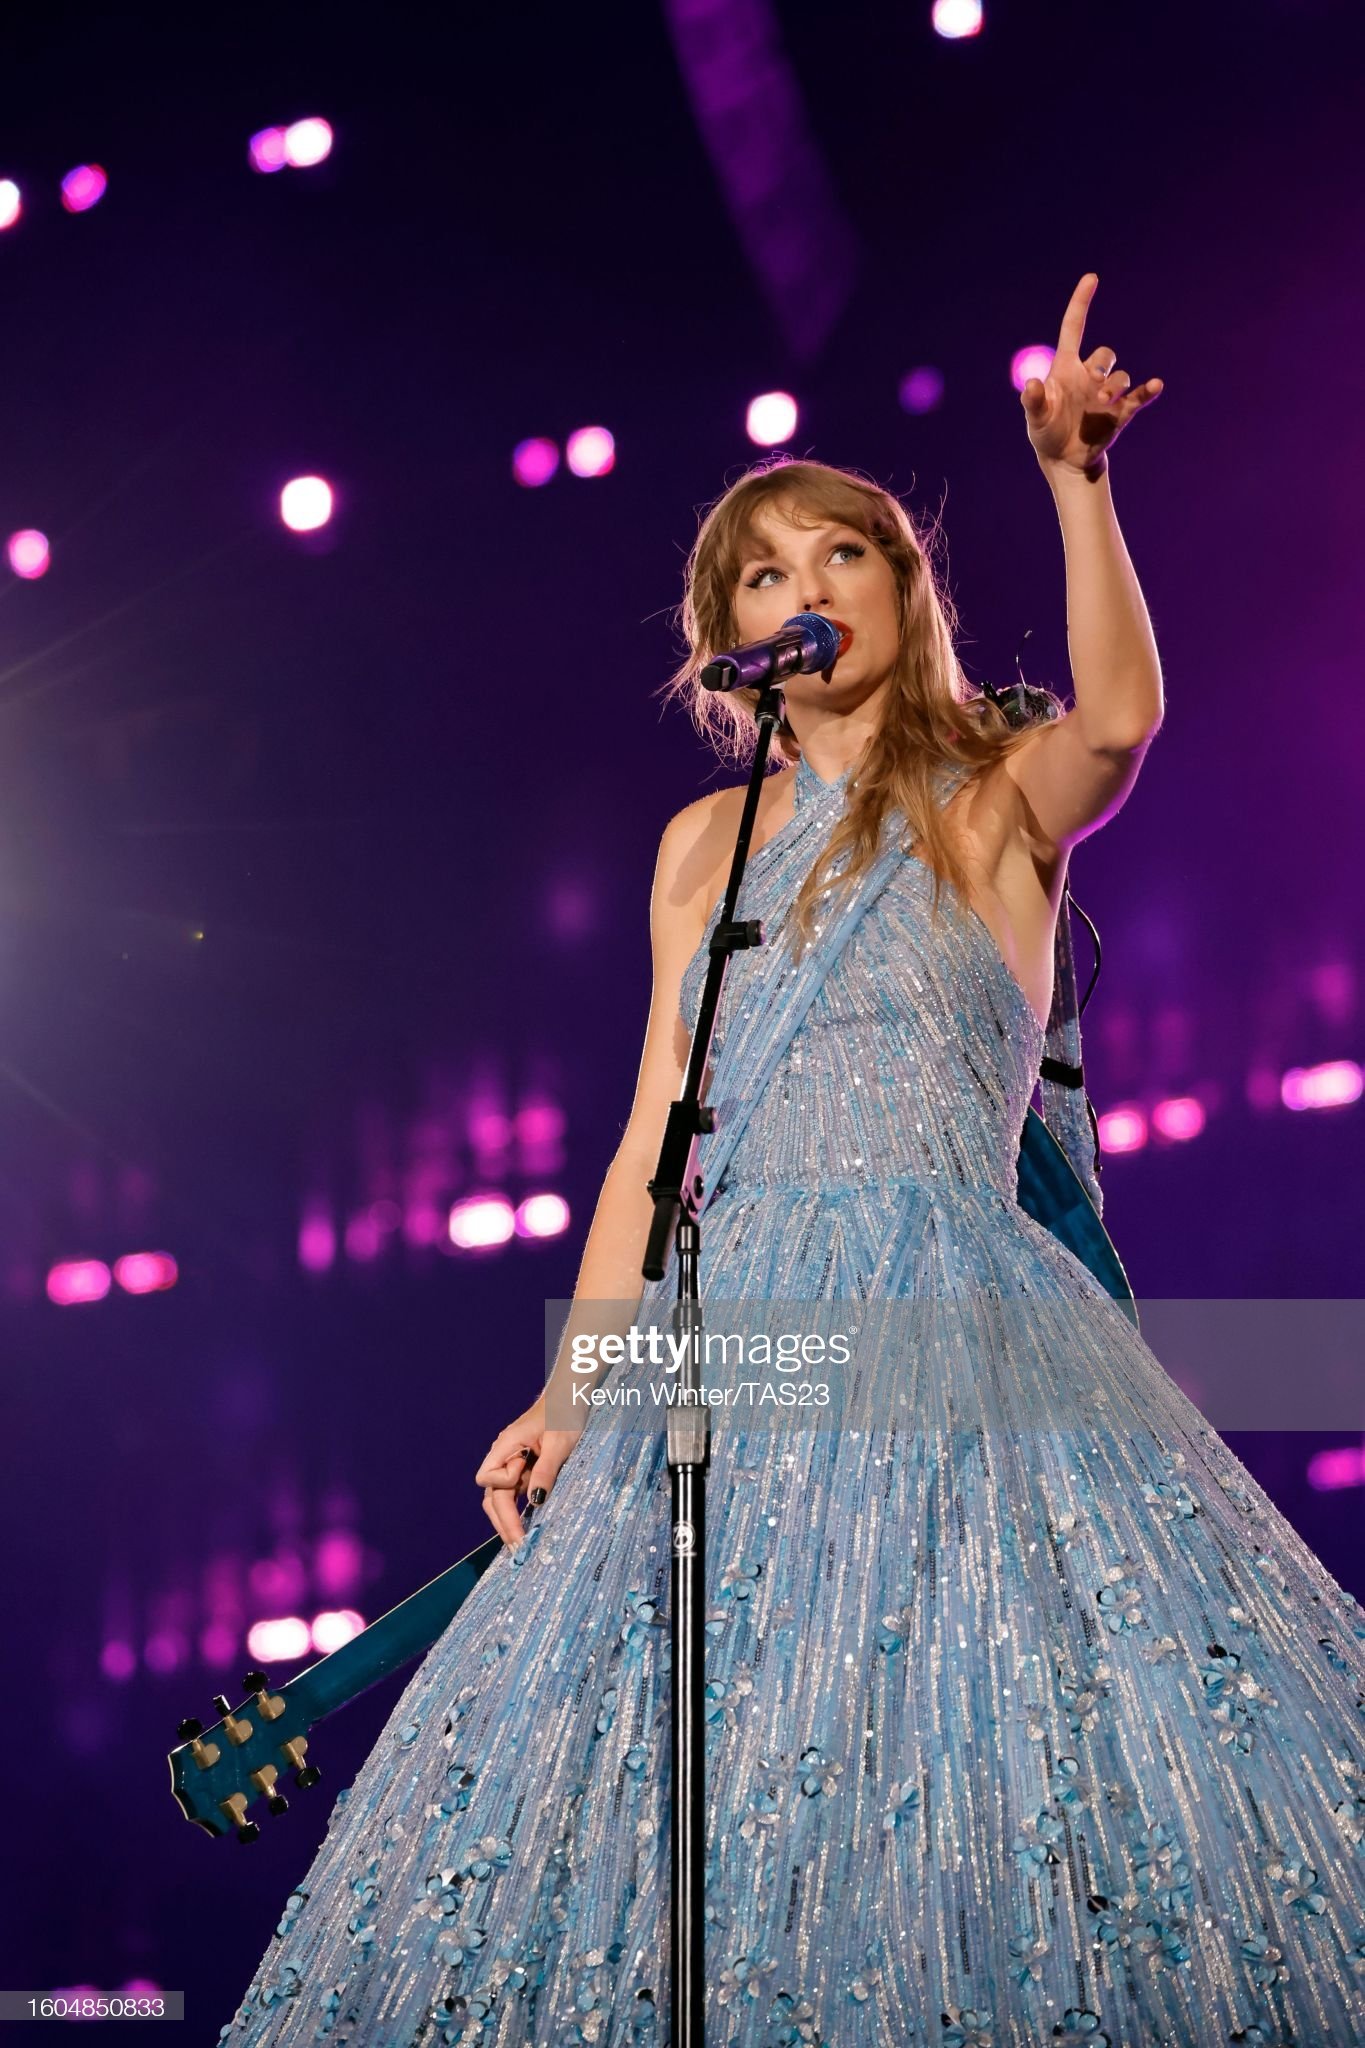 gettyimages-1604850833-2048x2048.jpg